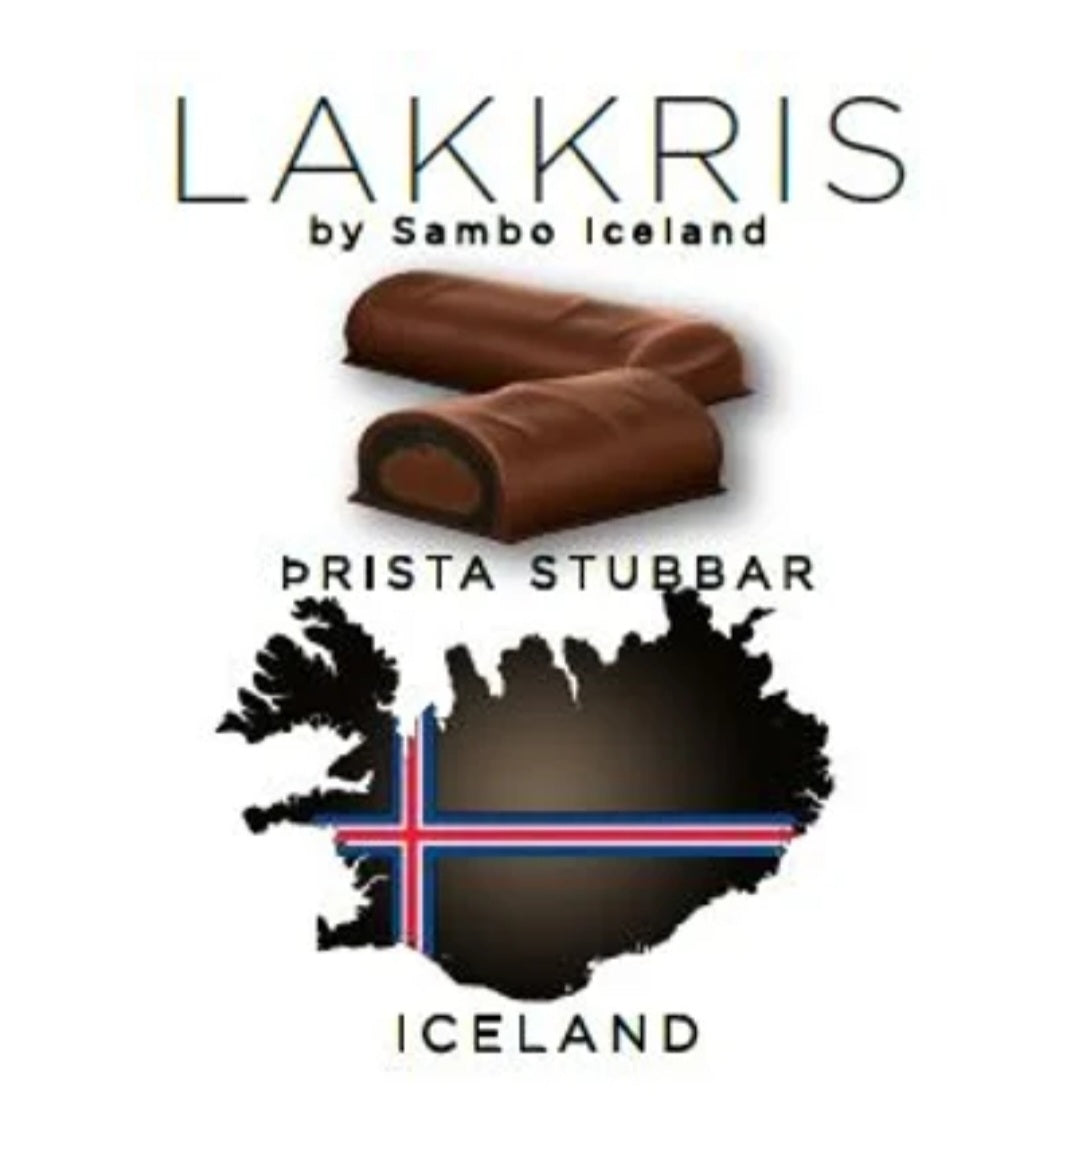 Lakkris Þristastubbar - pieces of chocolate covered licorice candy with soft chocolate center. -Topiceland